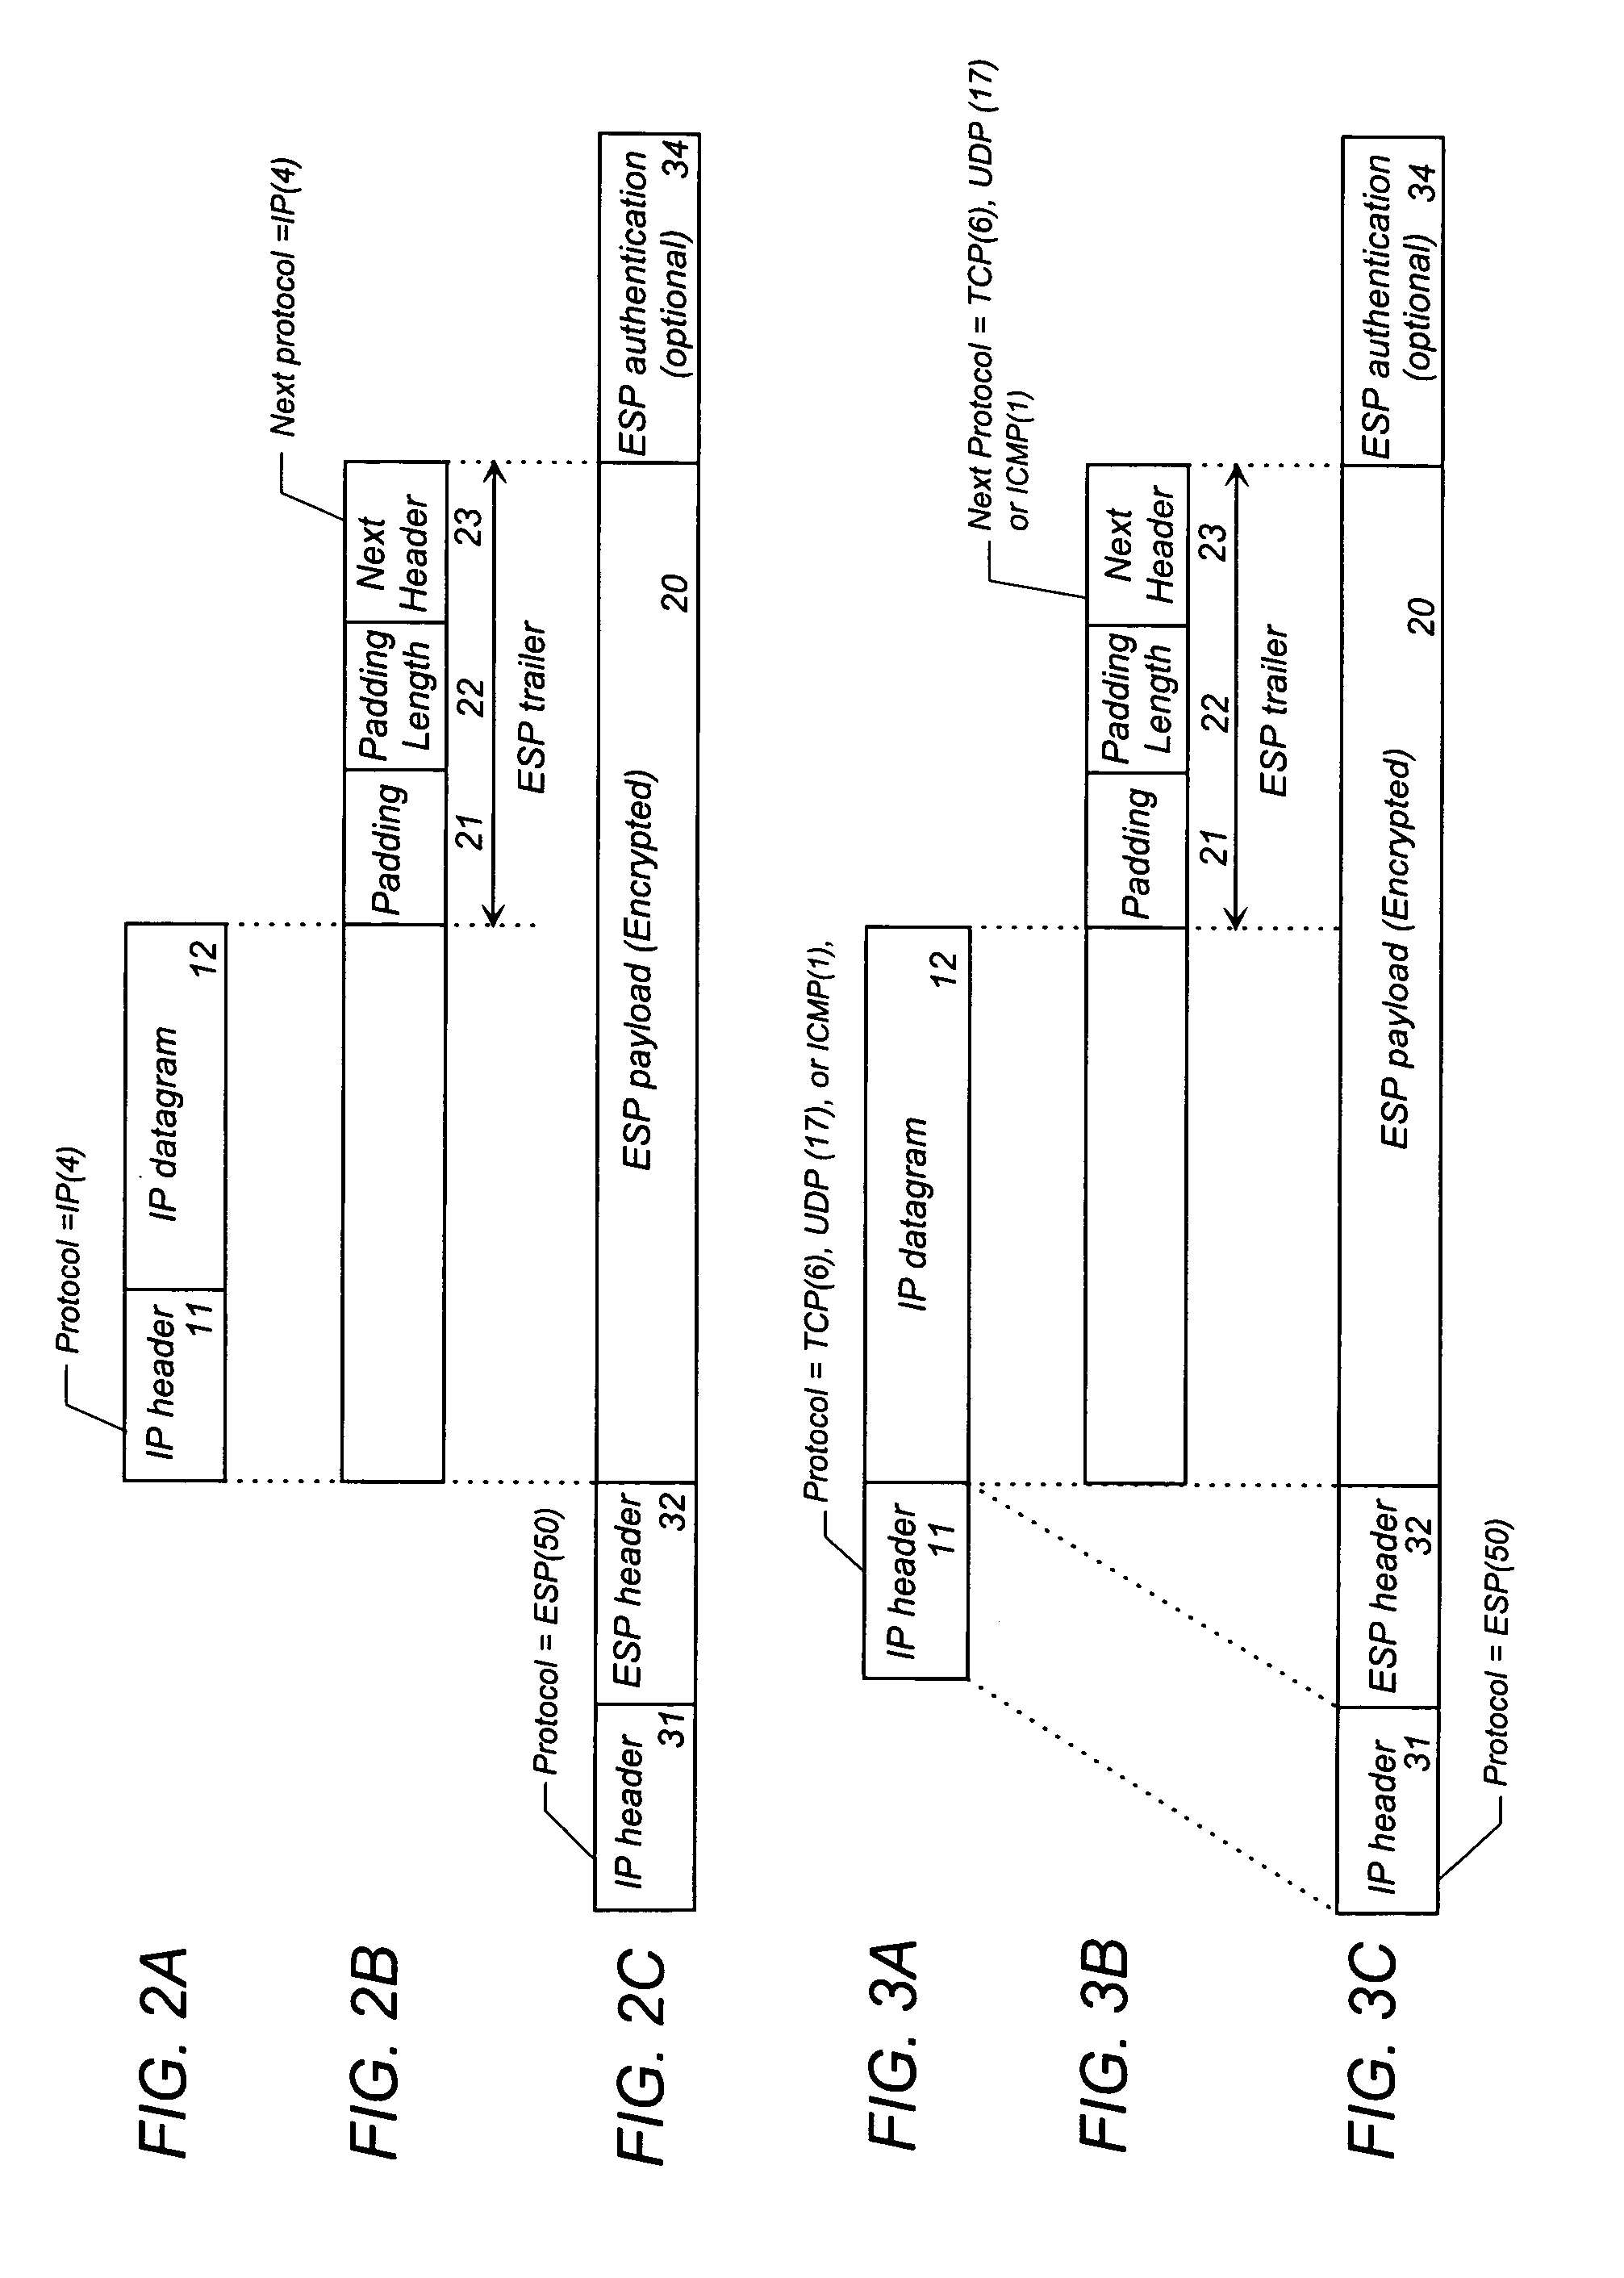 Encryption error monitoring system and method for packet transmission